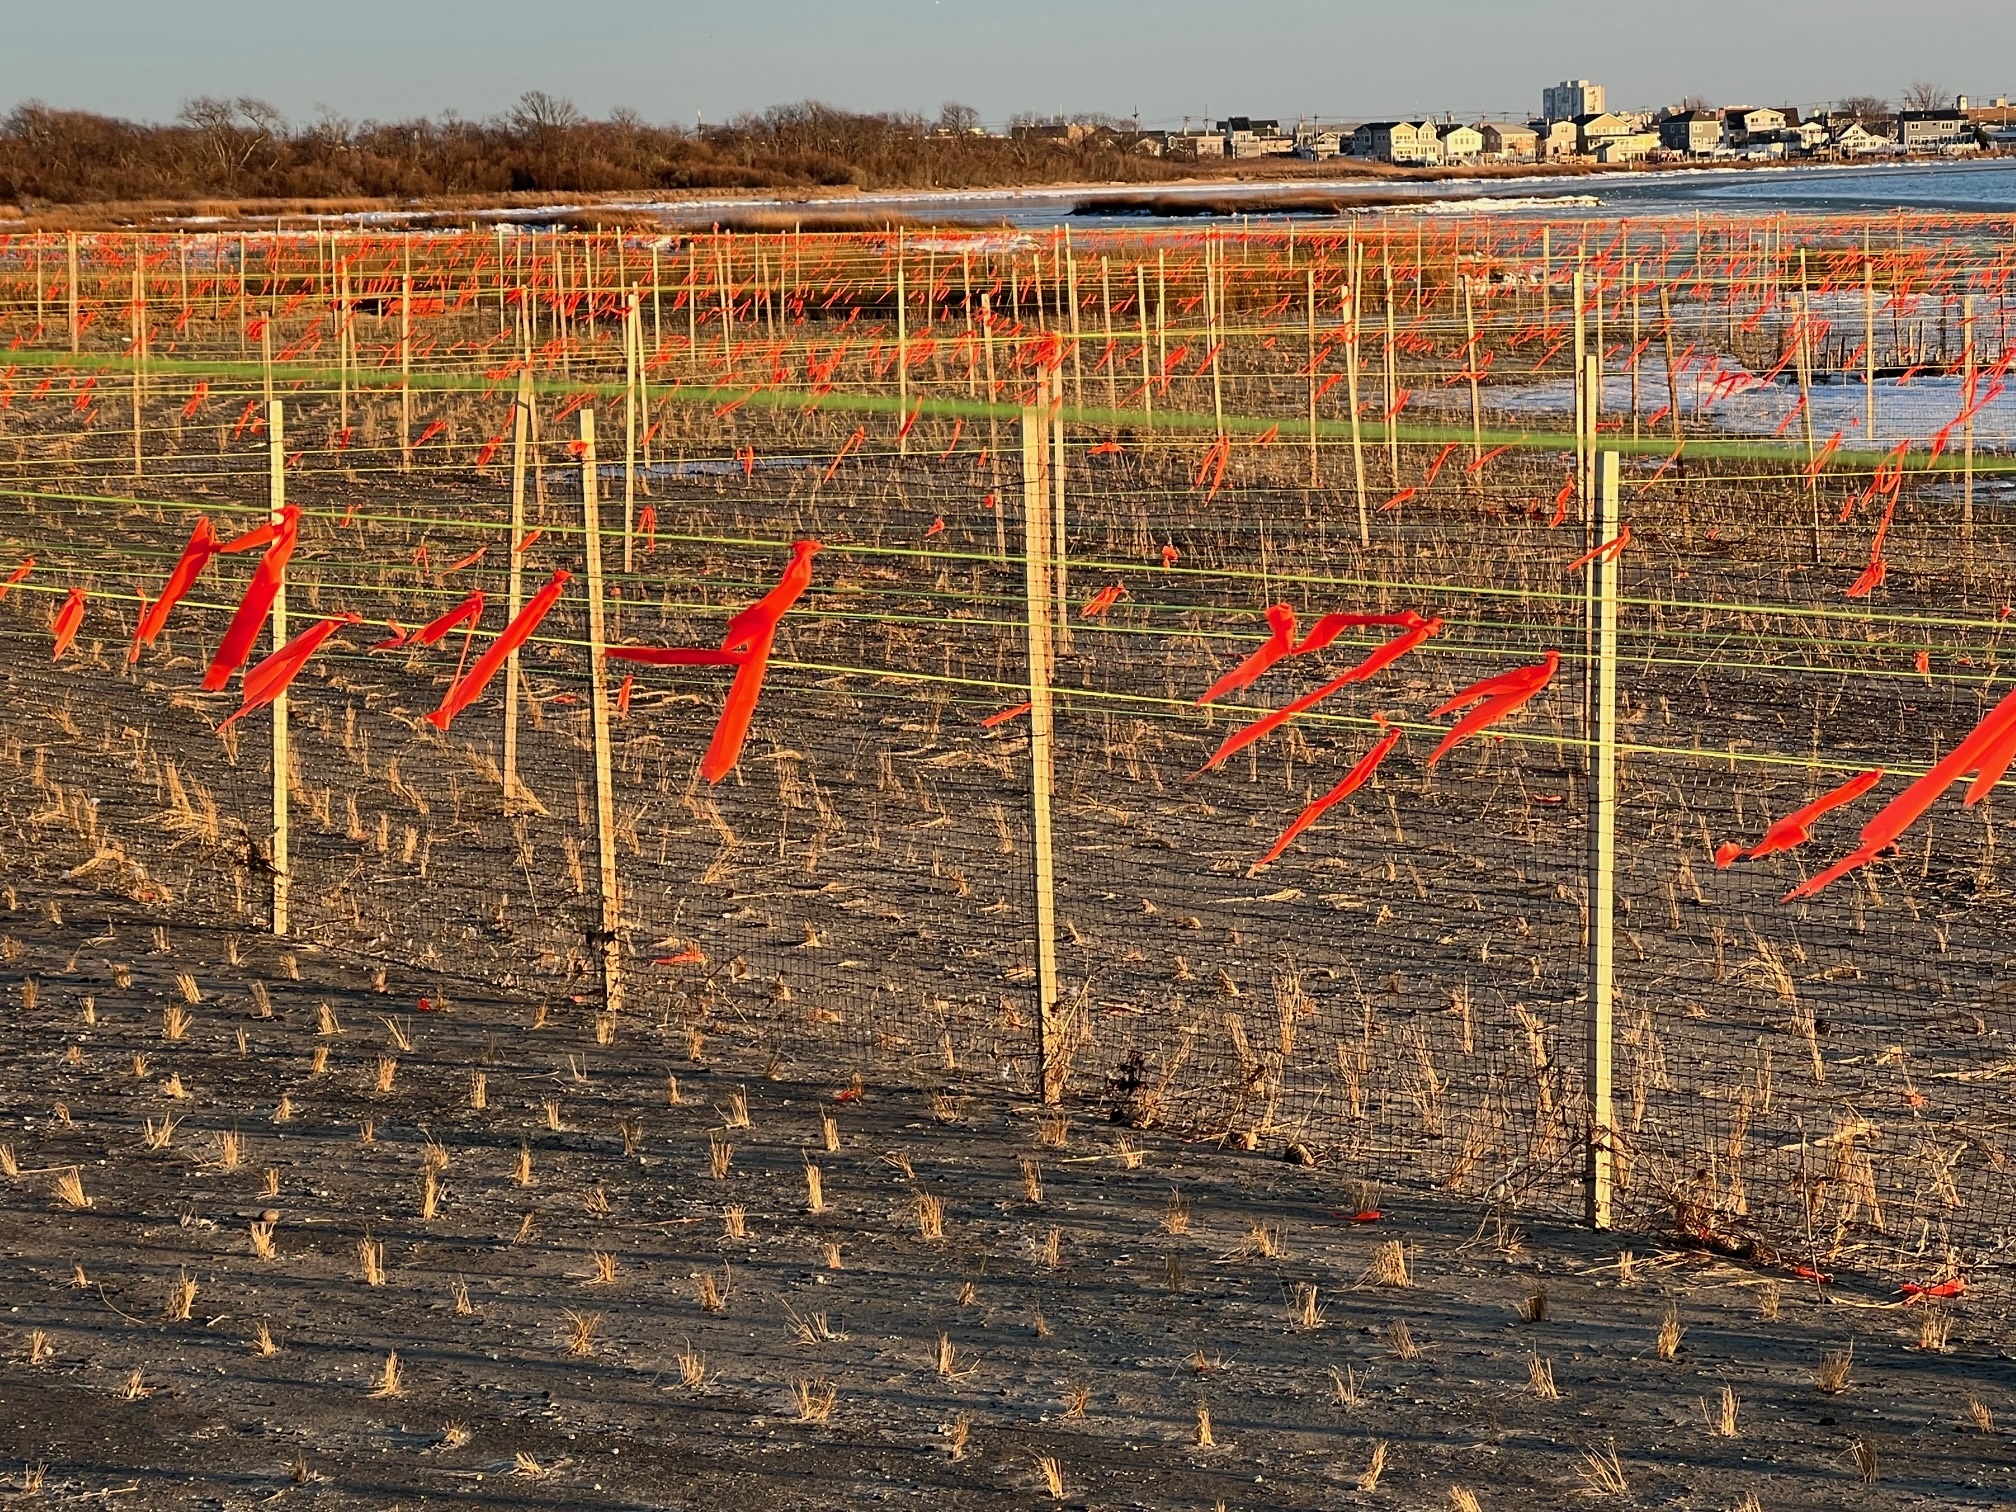 Orange flagging is strung over newly created and planted salt marsh beds to deter waterfowl from feeding on the young plants before they become established. Photo: Don Riepe